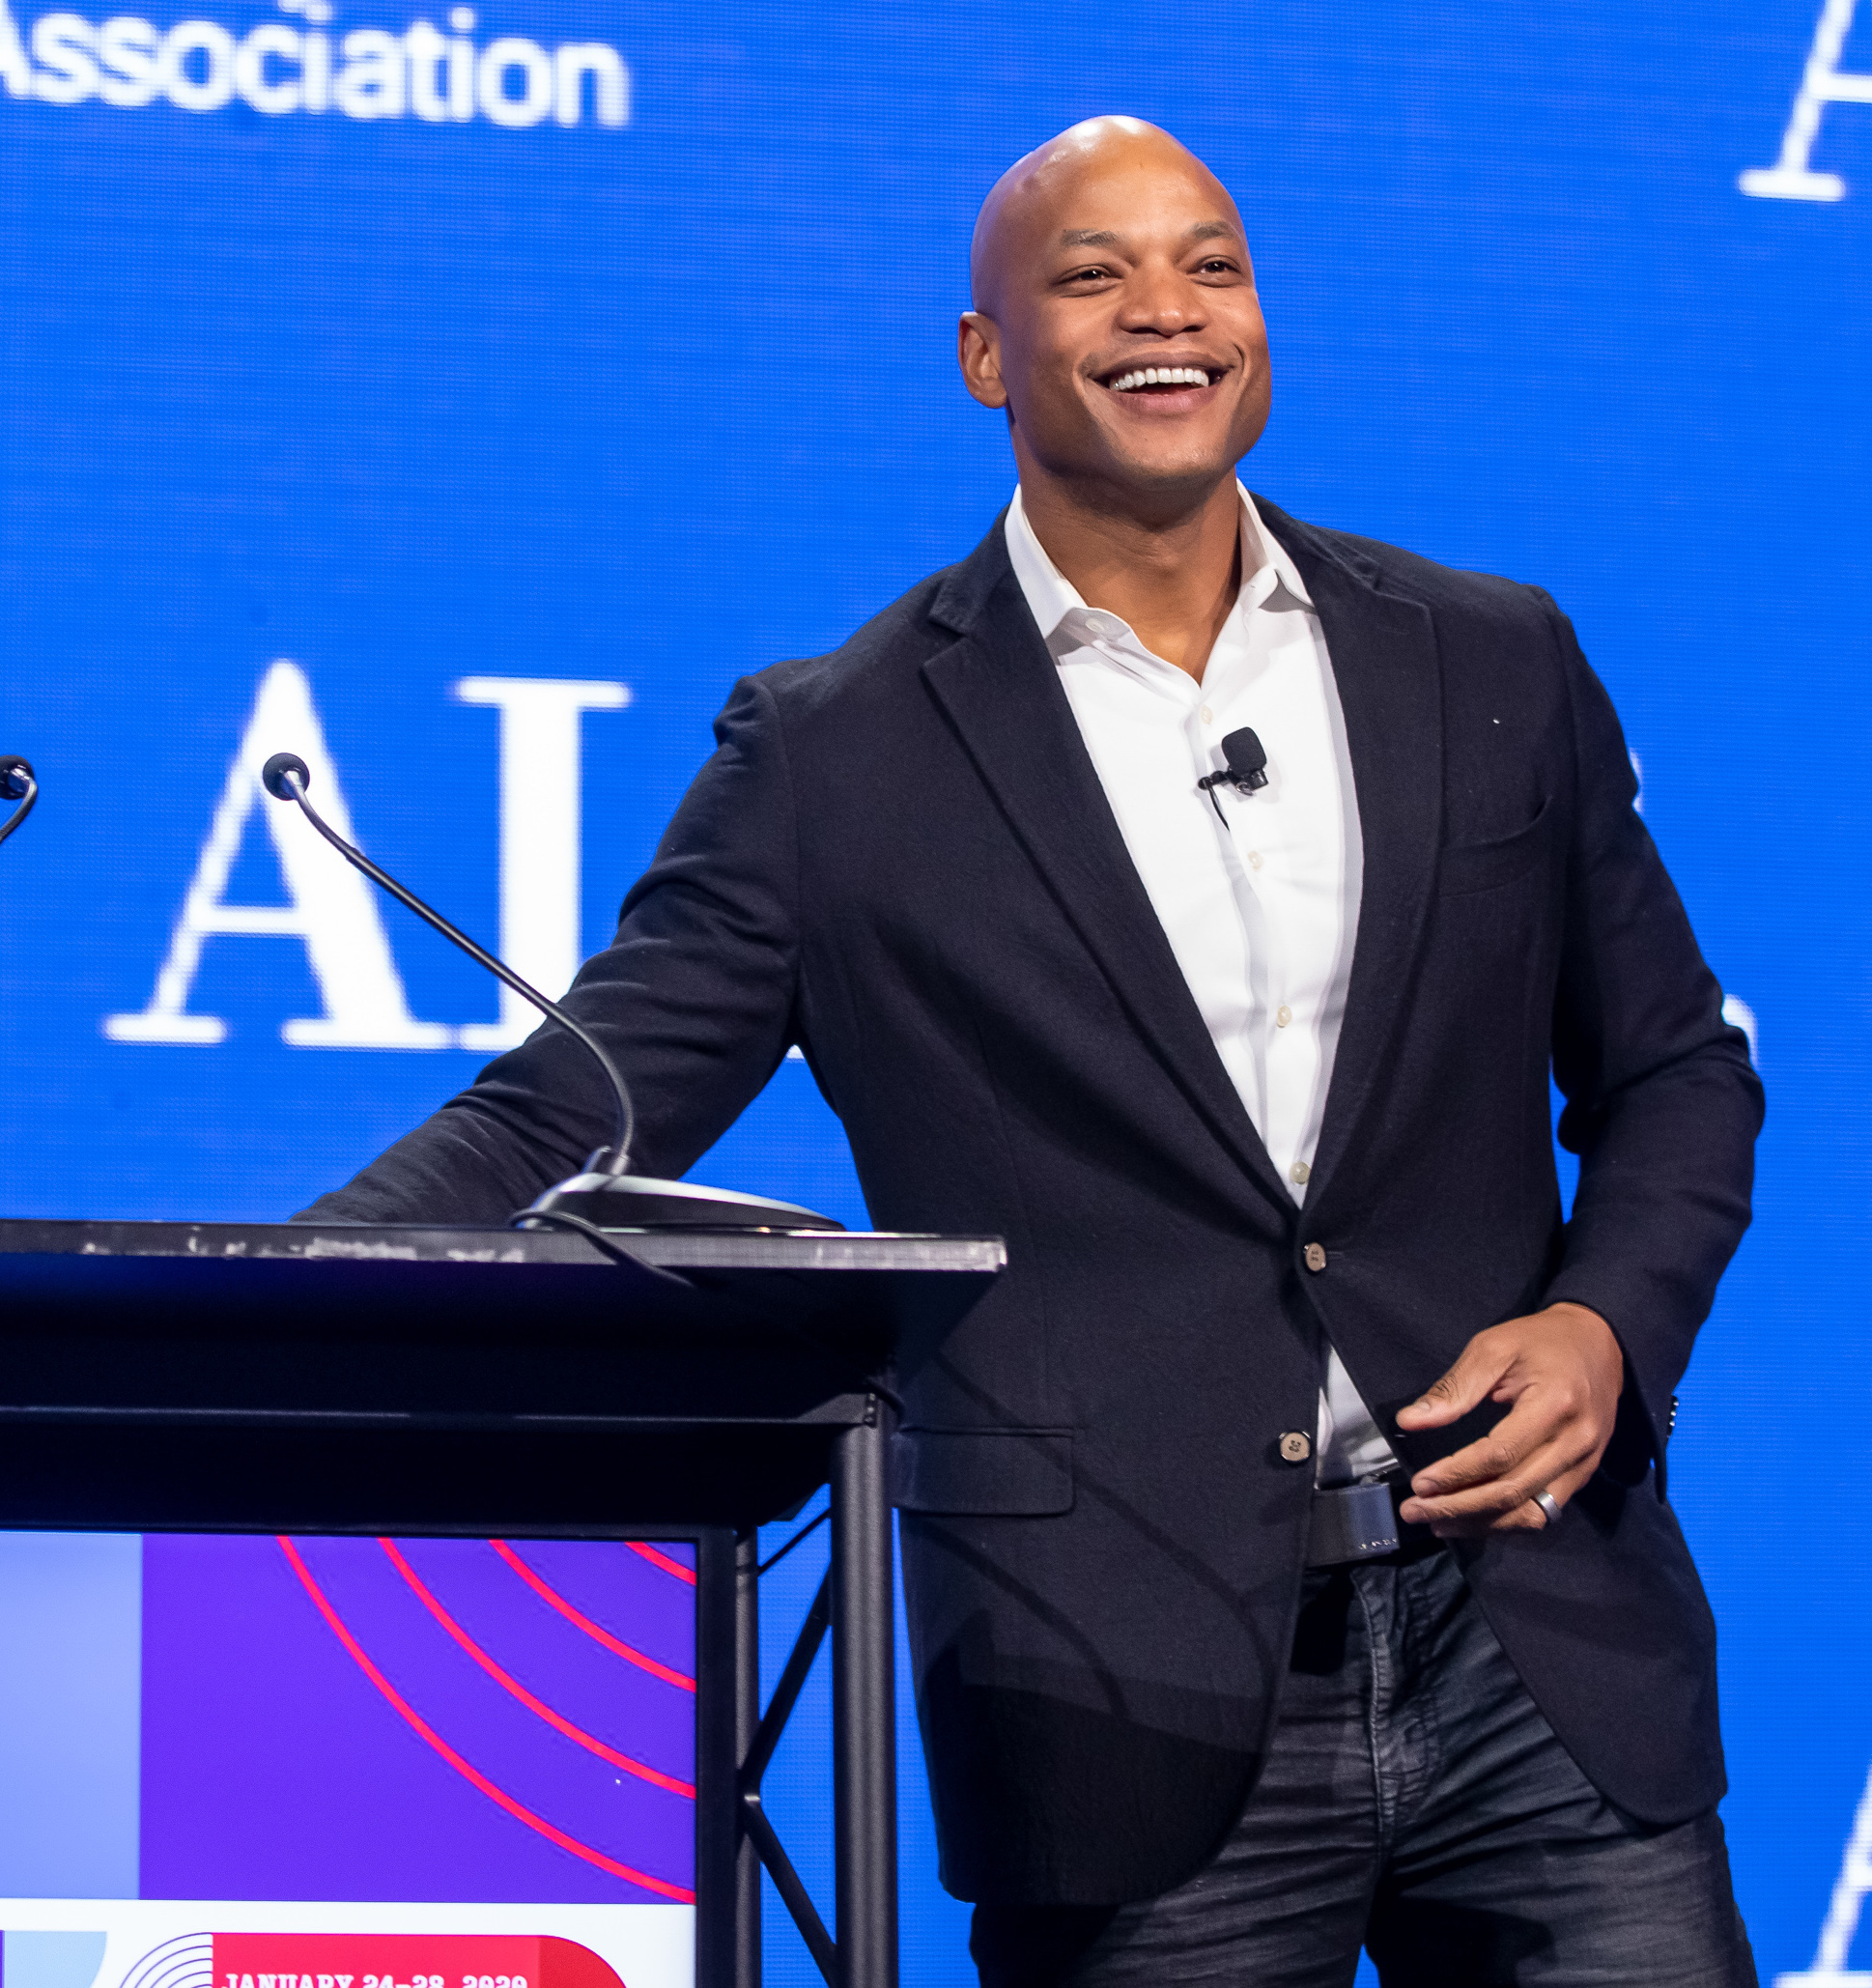 Wes Moore Kicks off Conference, Calls on Audience to Address Poverty | ALA Midwinter 2020